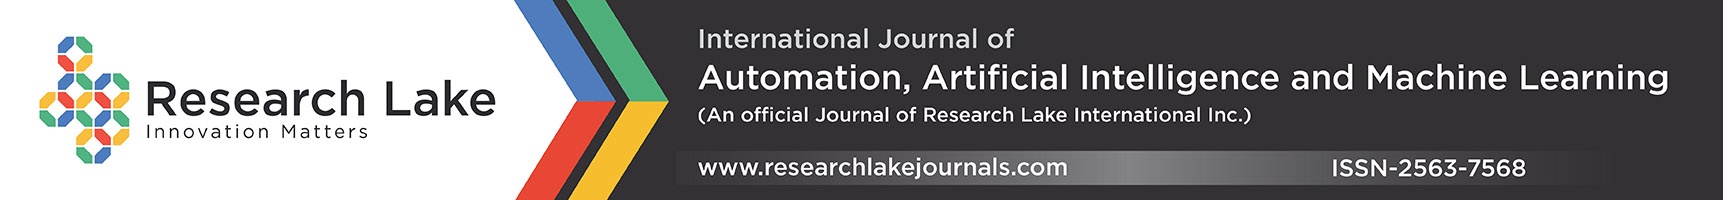  International journal of Automation, Artificial Intelligence and Machine Learning